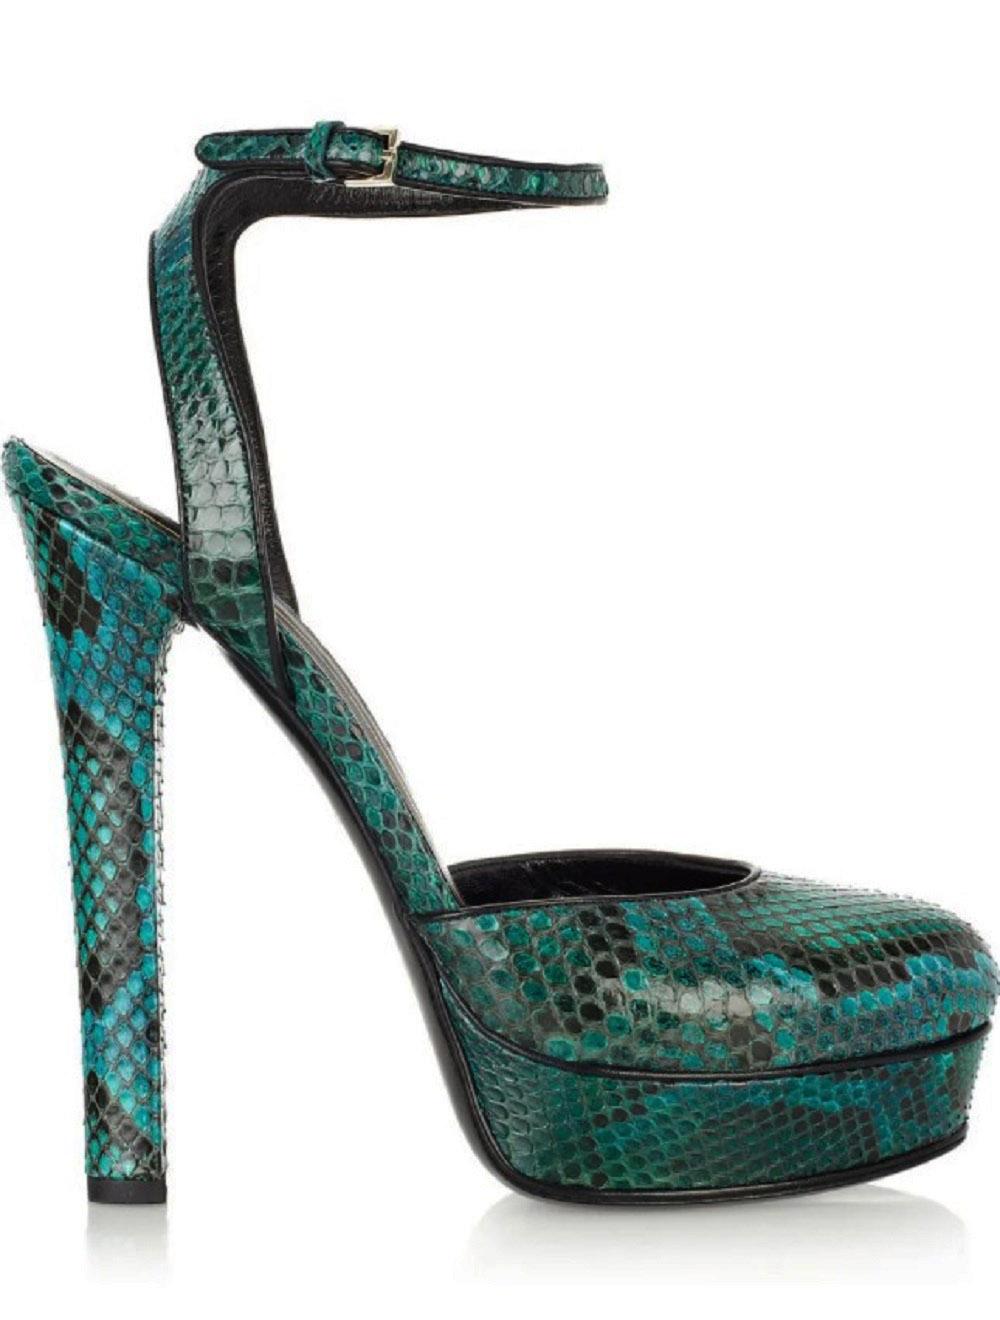 New Runway Gucci *Huston* Python Platform Shoes Sandals
Italian size 37 - US 7
Python Emerald Green, Buckle-Fastening Ankle Strap, Closed Almond Toe-Line, Leather Lining and Sole.
Heel Height - 6 inches, Platform - 1 inch.
Made in Italy.
New with